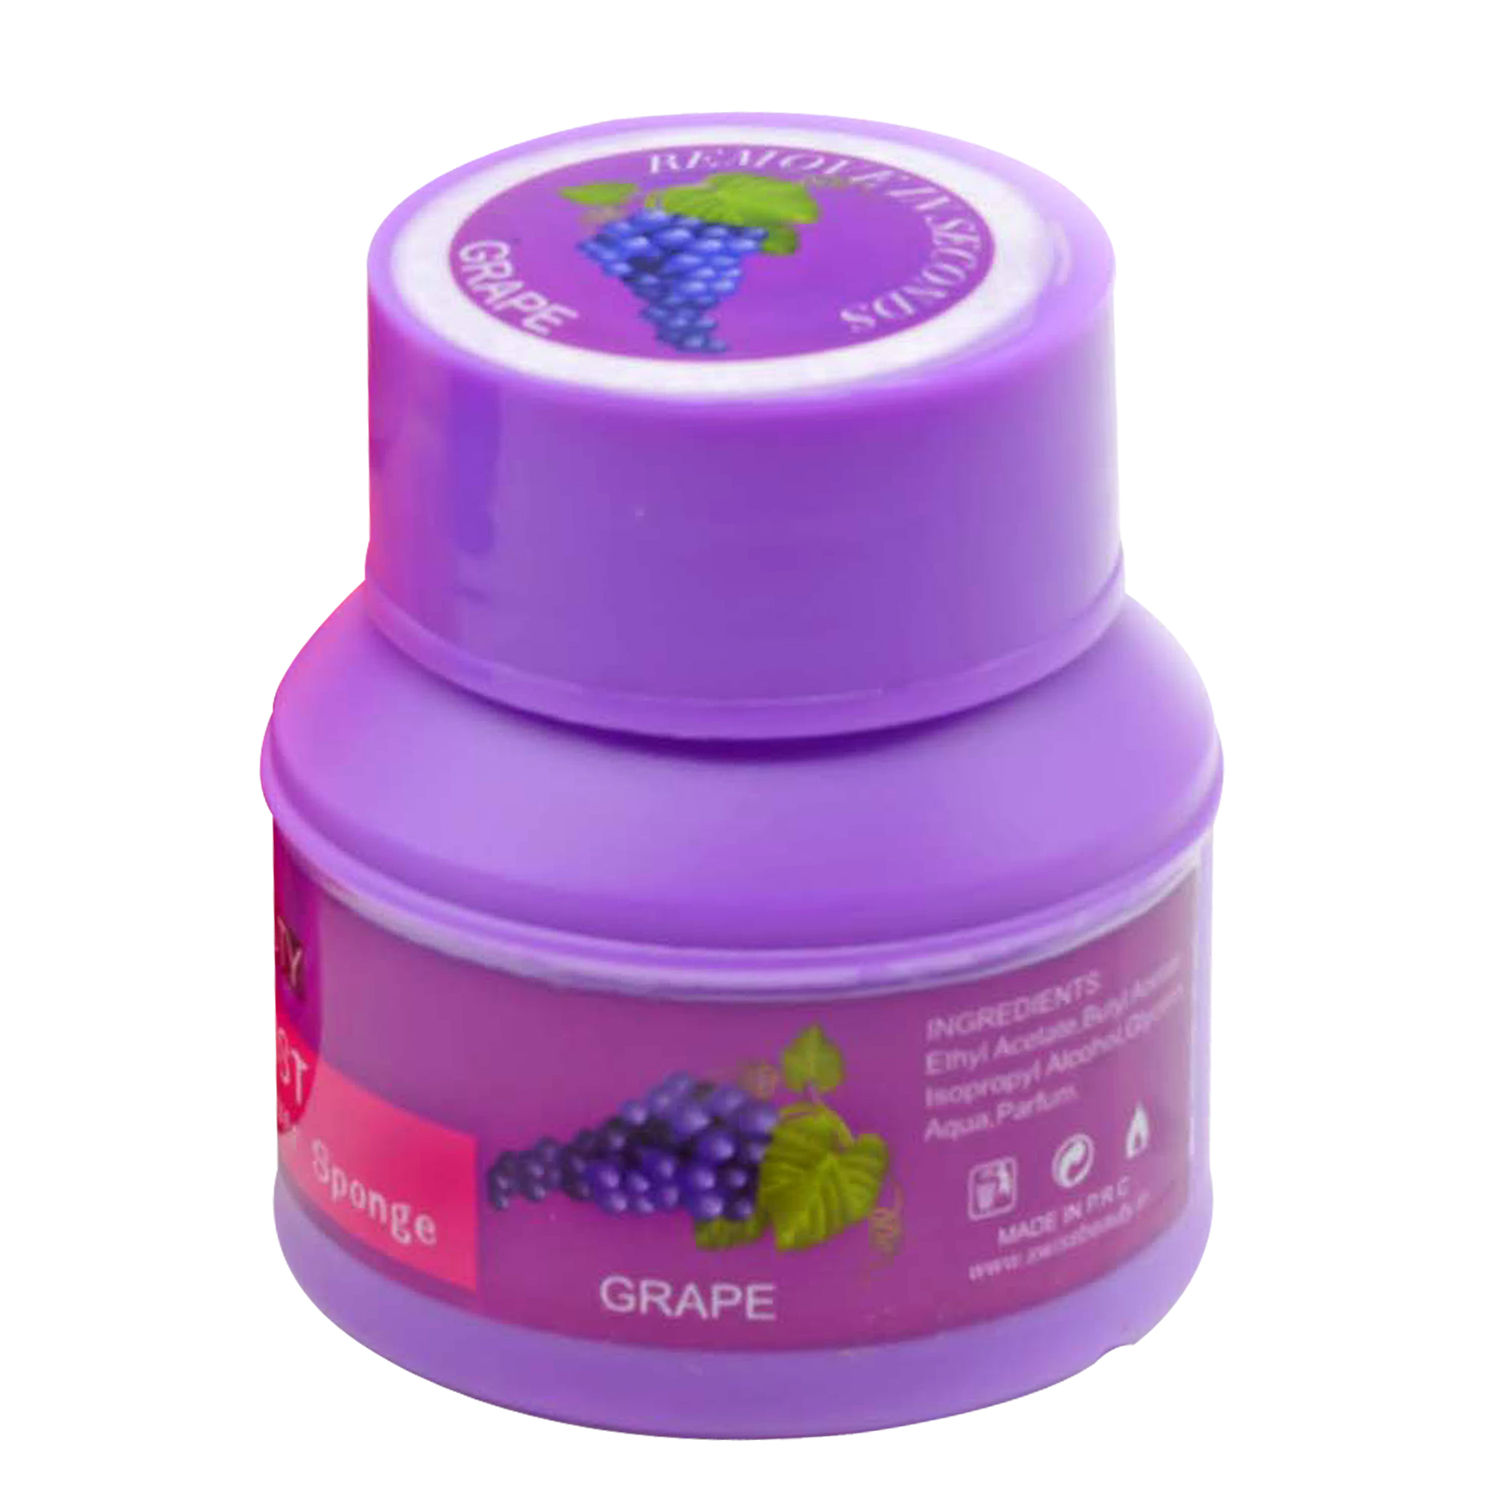 Swiss Beauty Dip Twist Nail Lacquer Remover Sponge Grape Buy Swiss Beauty Dip Twist Nail Lacquer Remover Sponge Grape Online At Best Price In India Nykaa